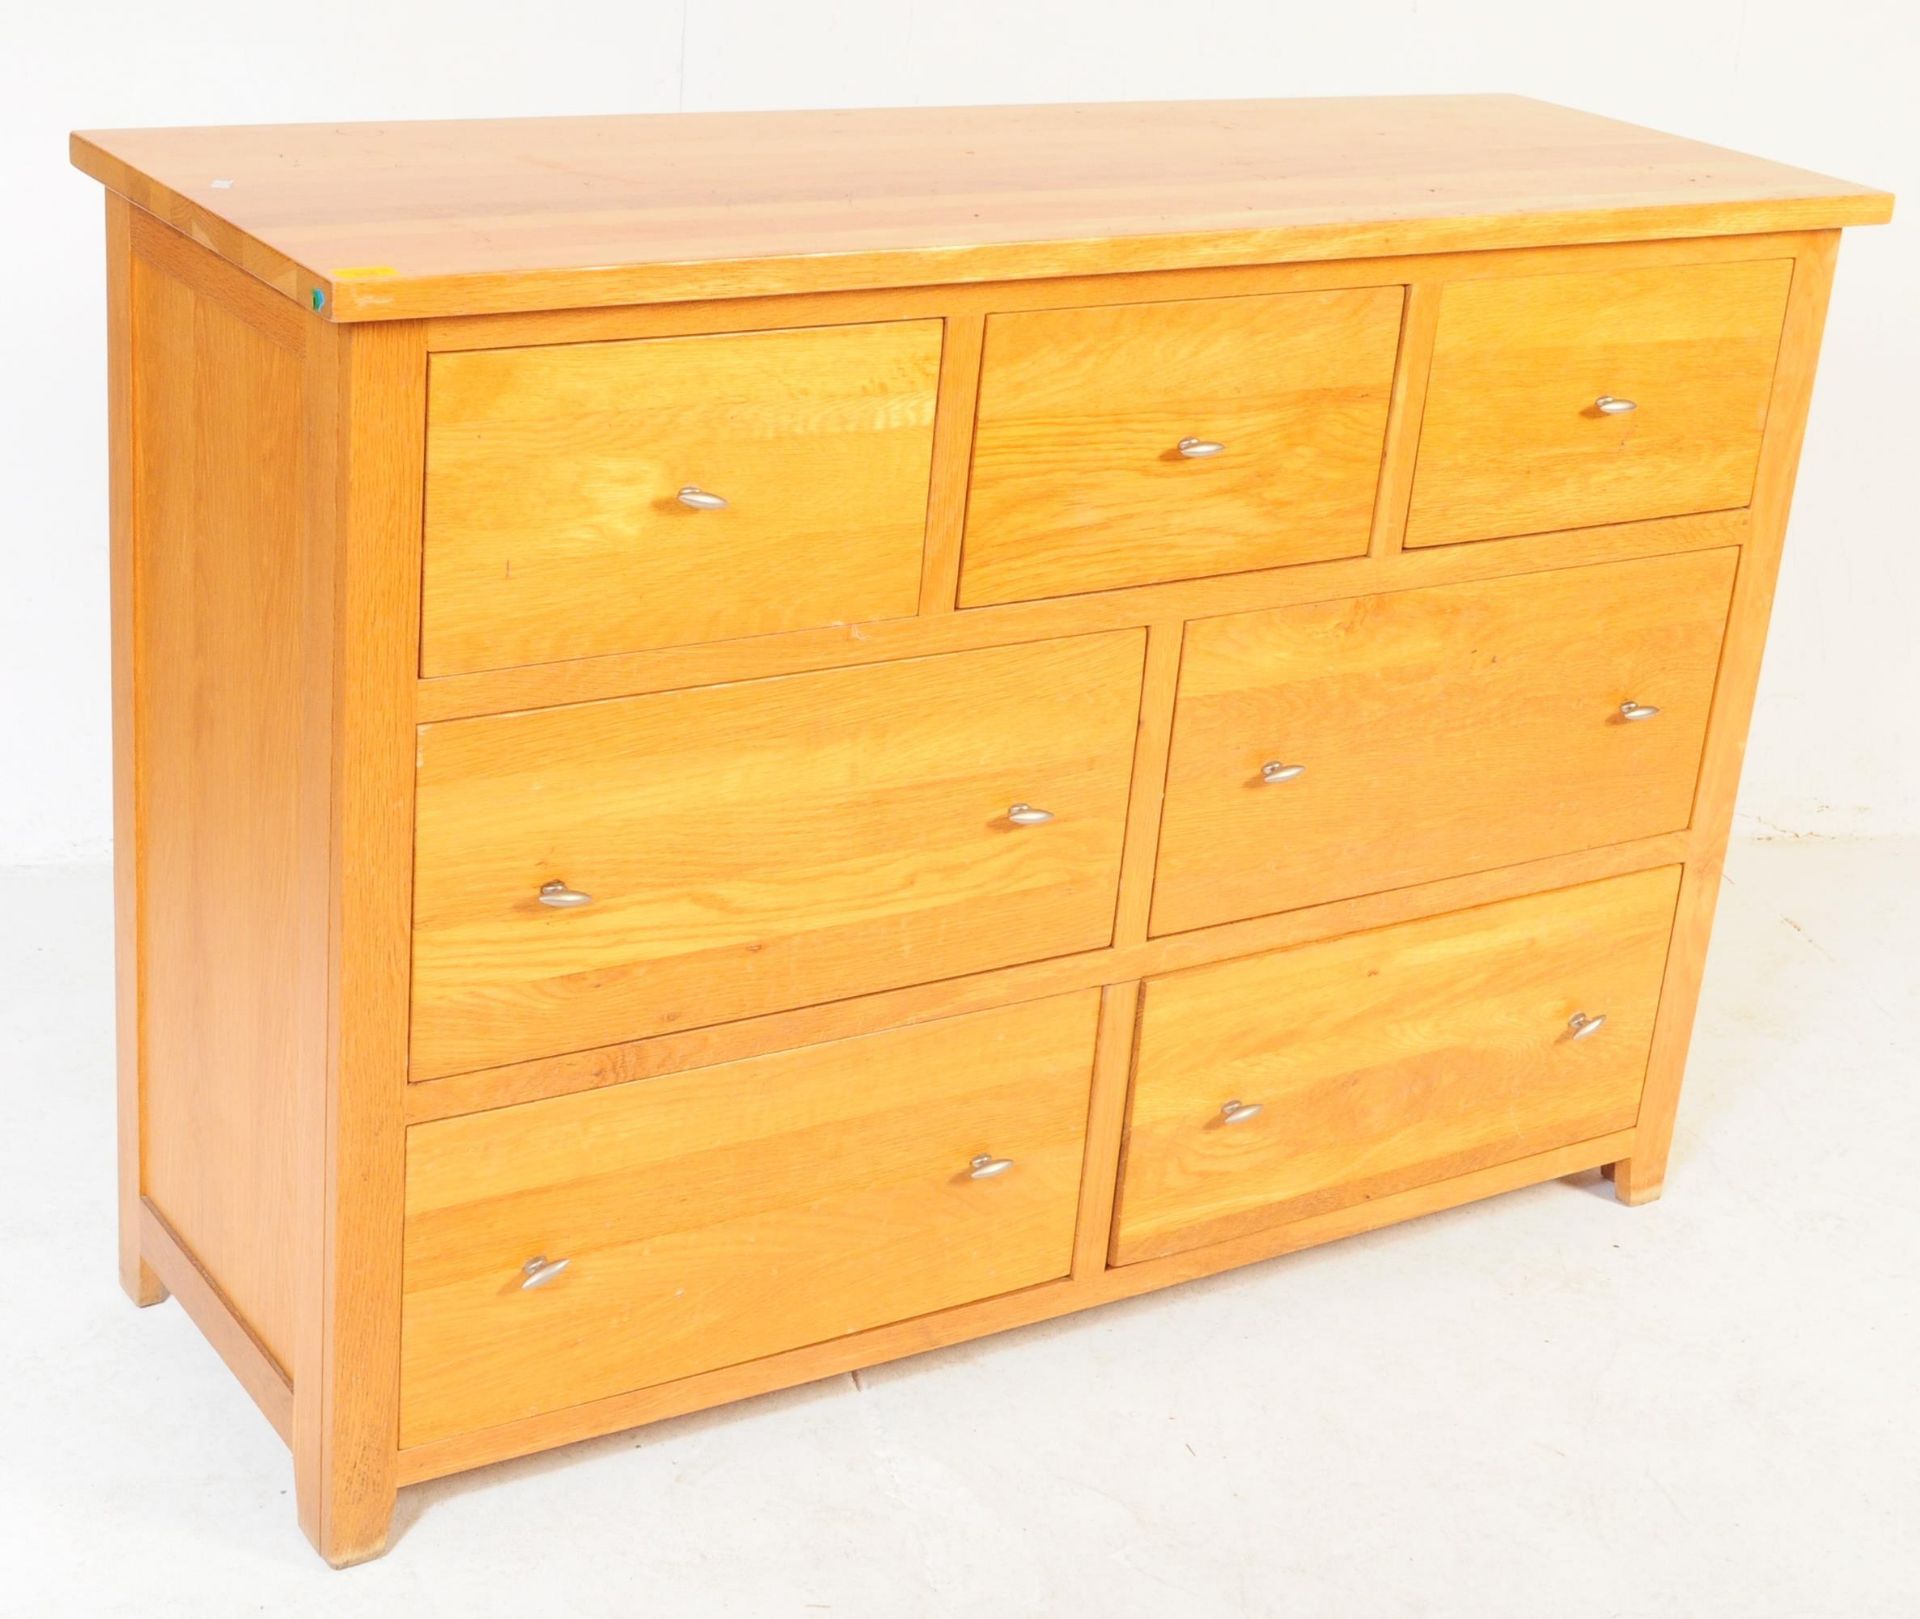 CONTEMPORARY OAK FURNITURE LAND STYLE SIDEBOARD CREDENZA - Image 2 of 6